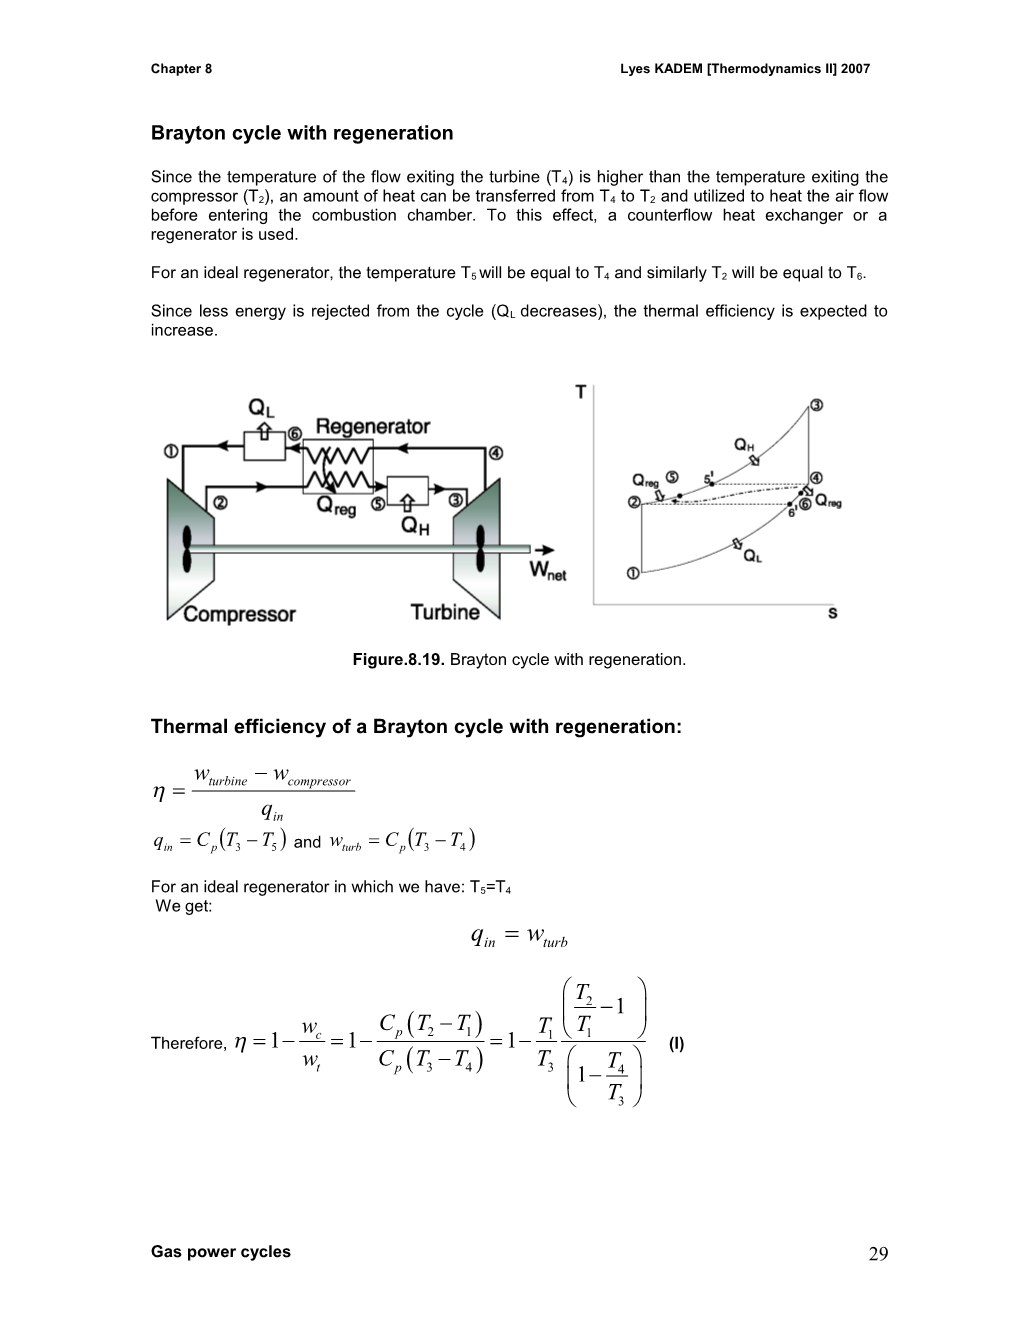 Second Law Analysis of Rankine Cycle